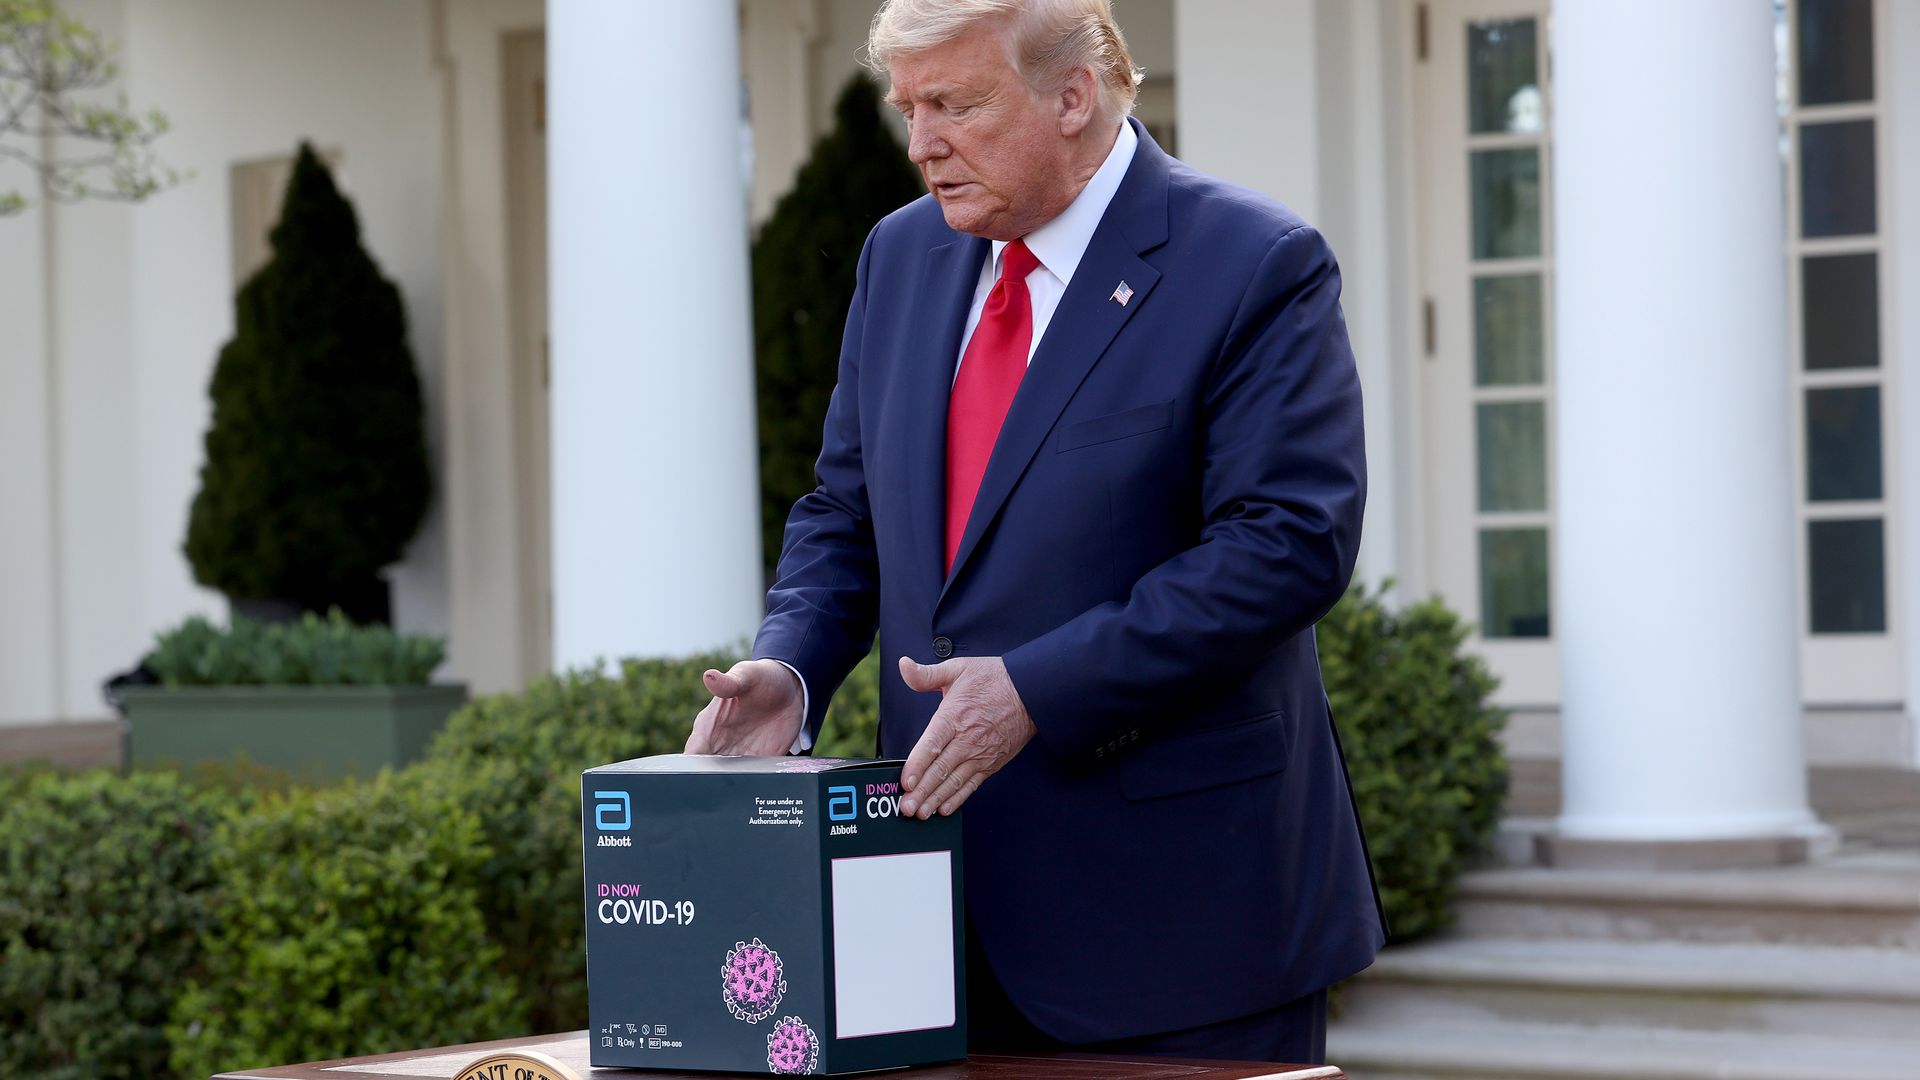 In this image, Trump holds the coronavirus test at the White House